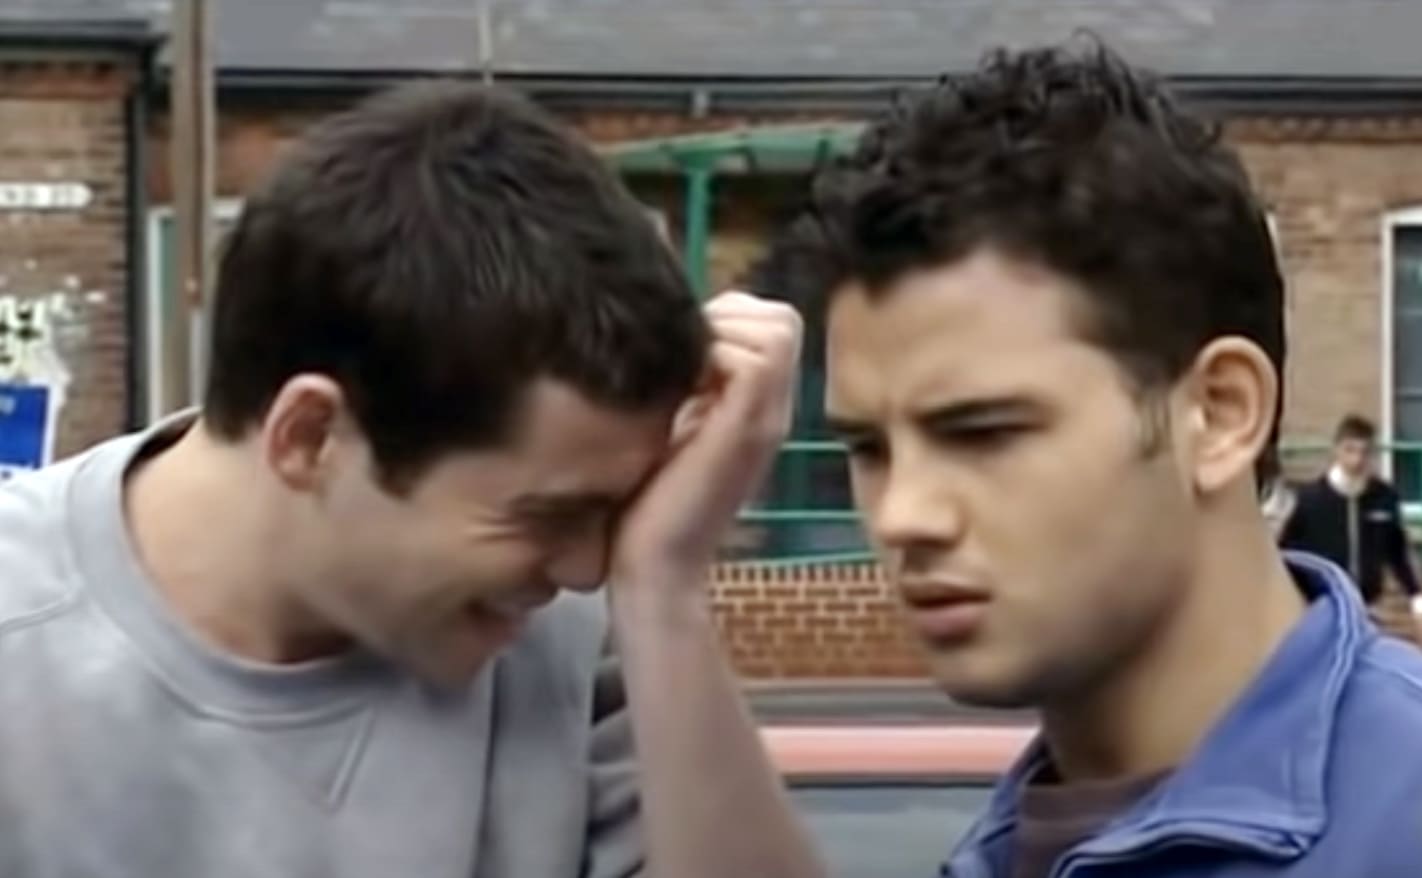 In Coronation Street, Jason separates a fight between Nick and Todd then call his brother a slur